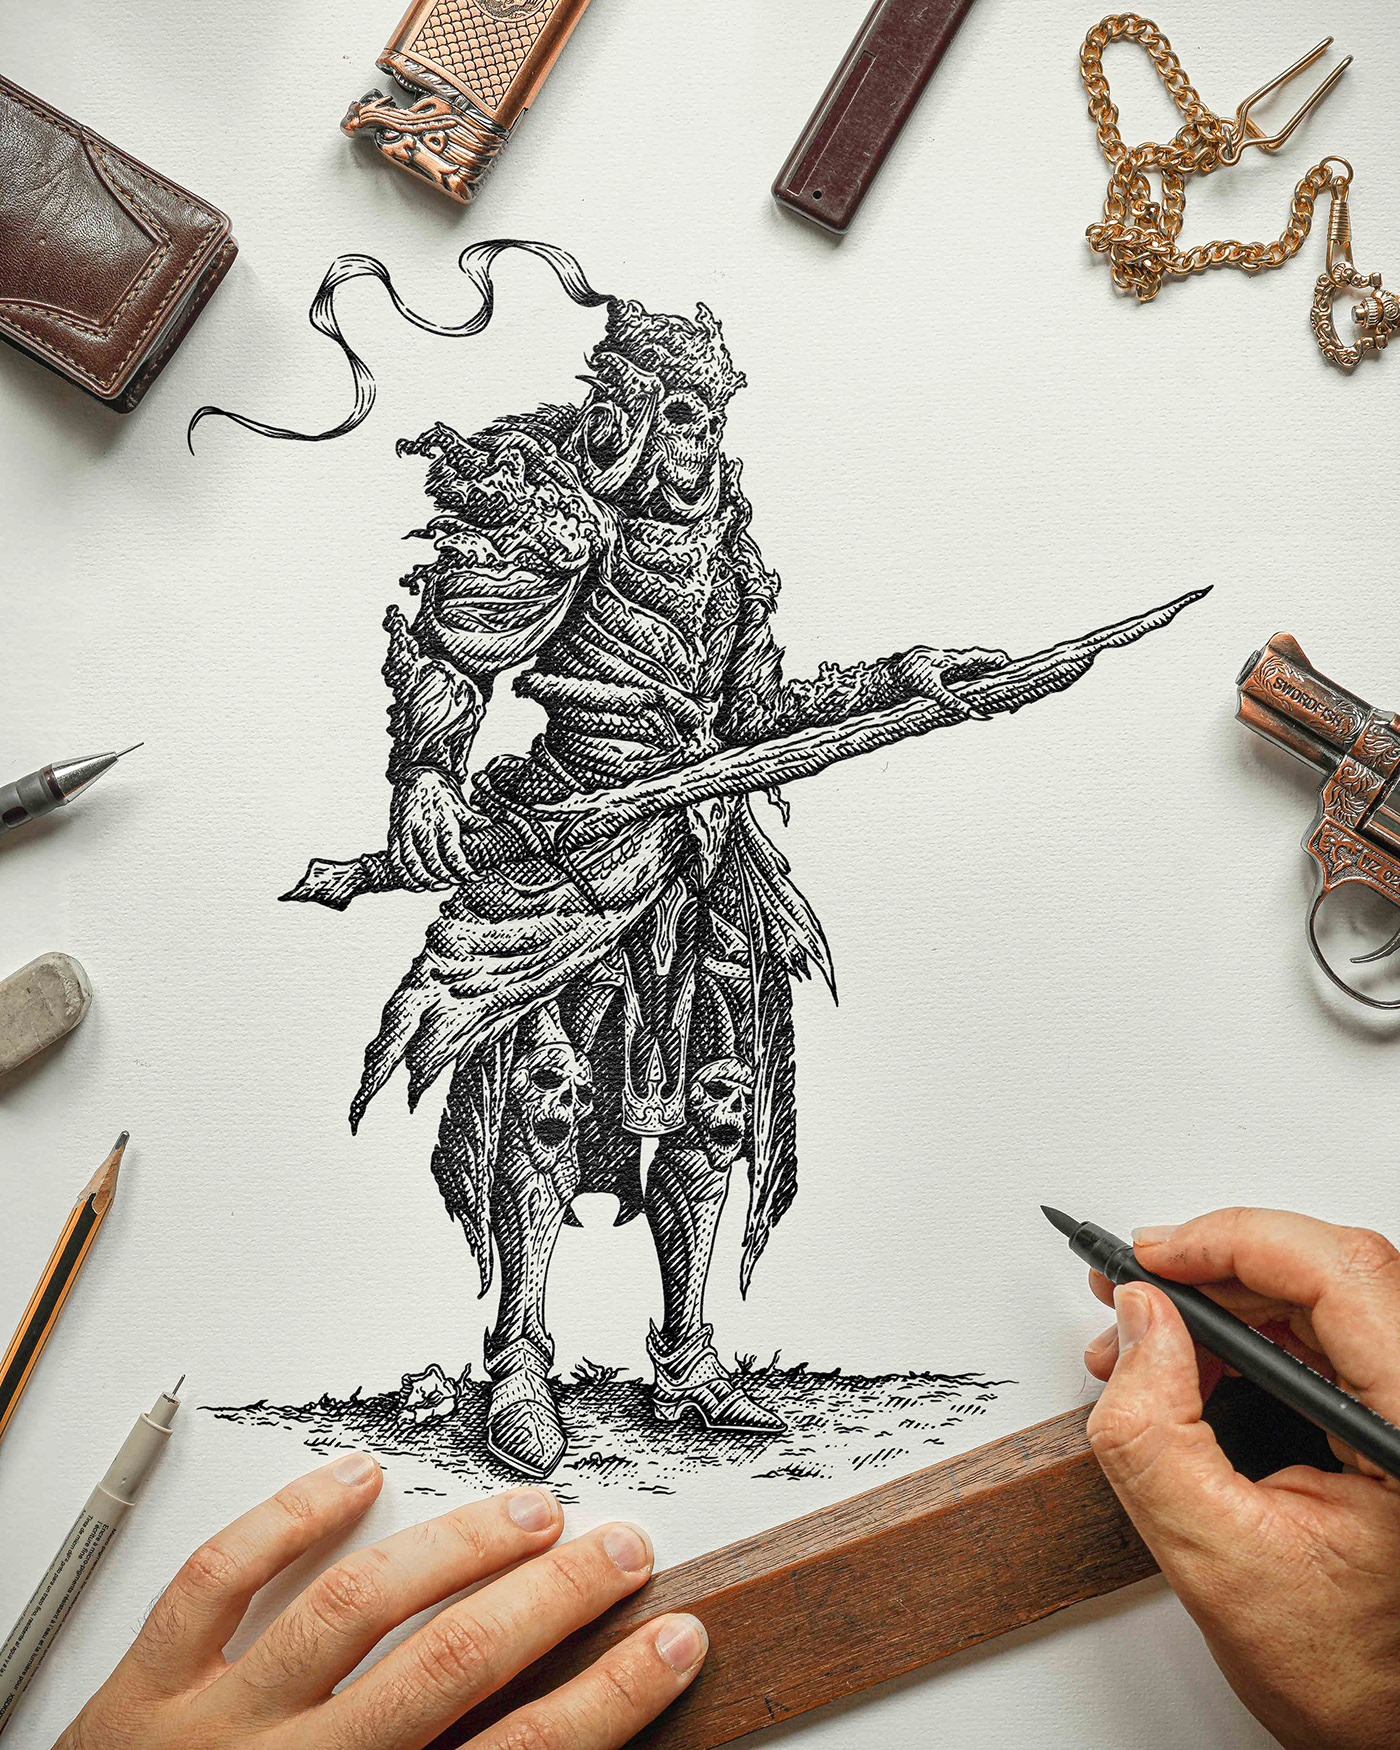 black and white drawing Detailed illustration fantasy character knight pen and ink pen illustration Pencil drawing tattoo tattoo design vintage illustration